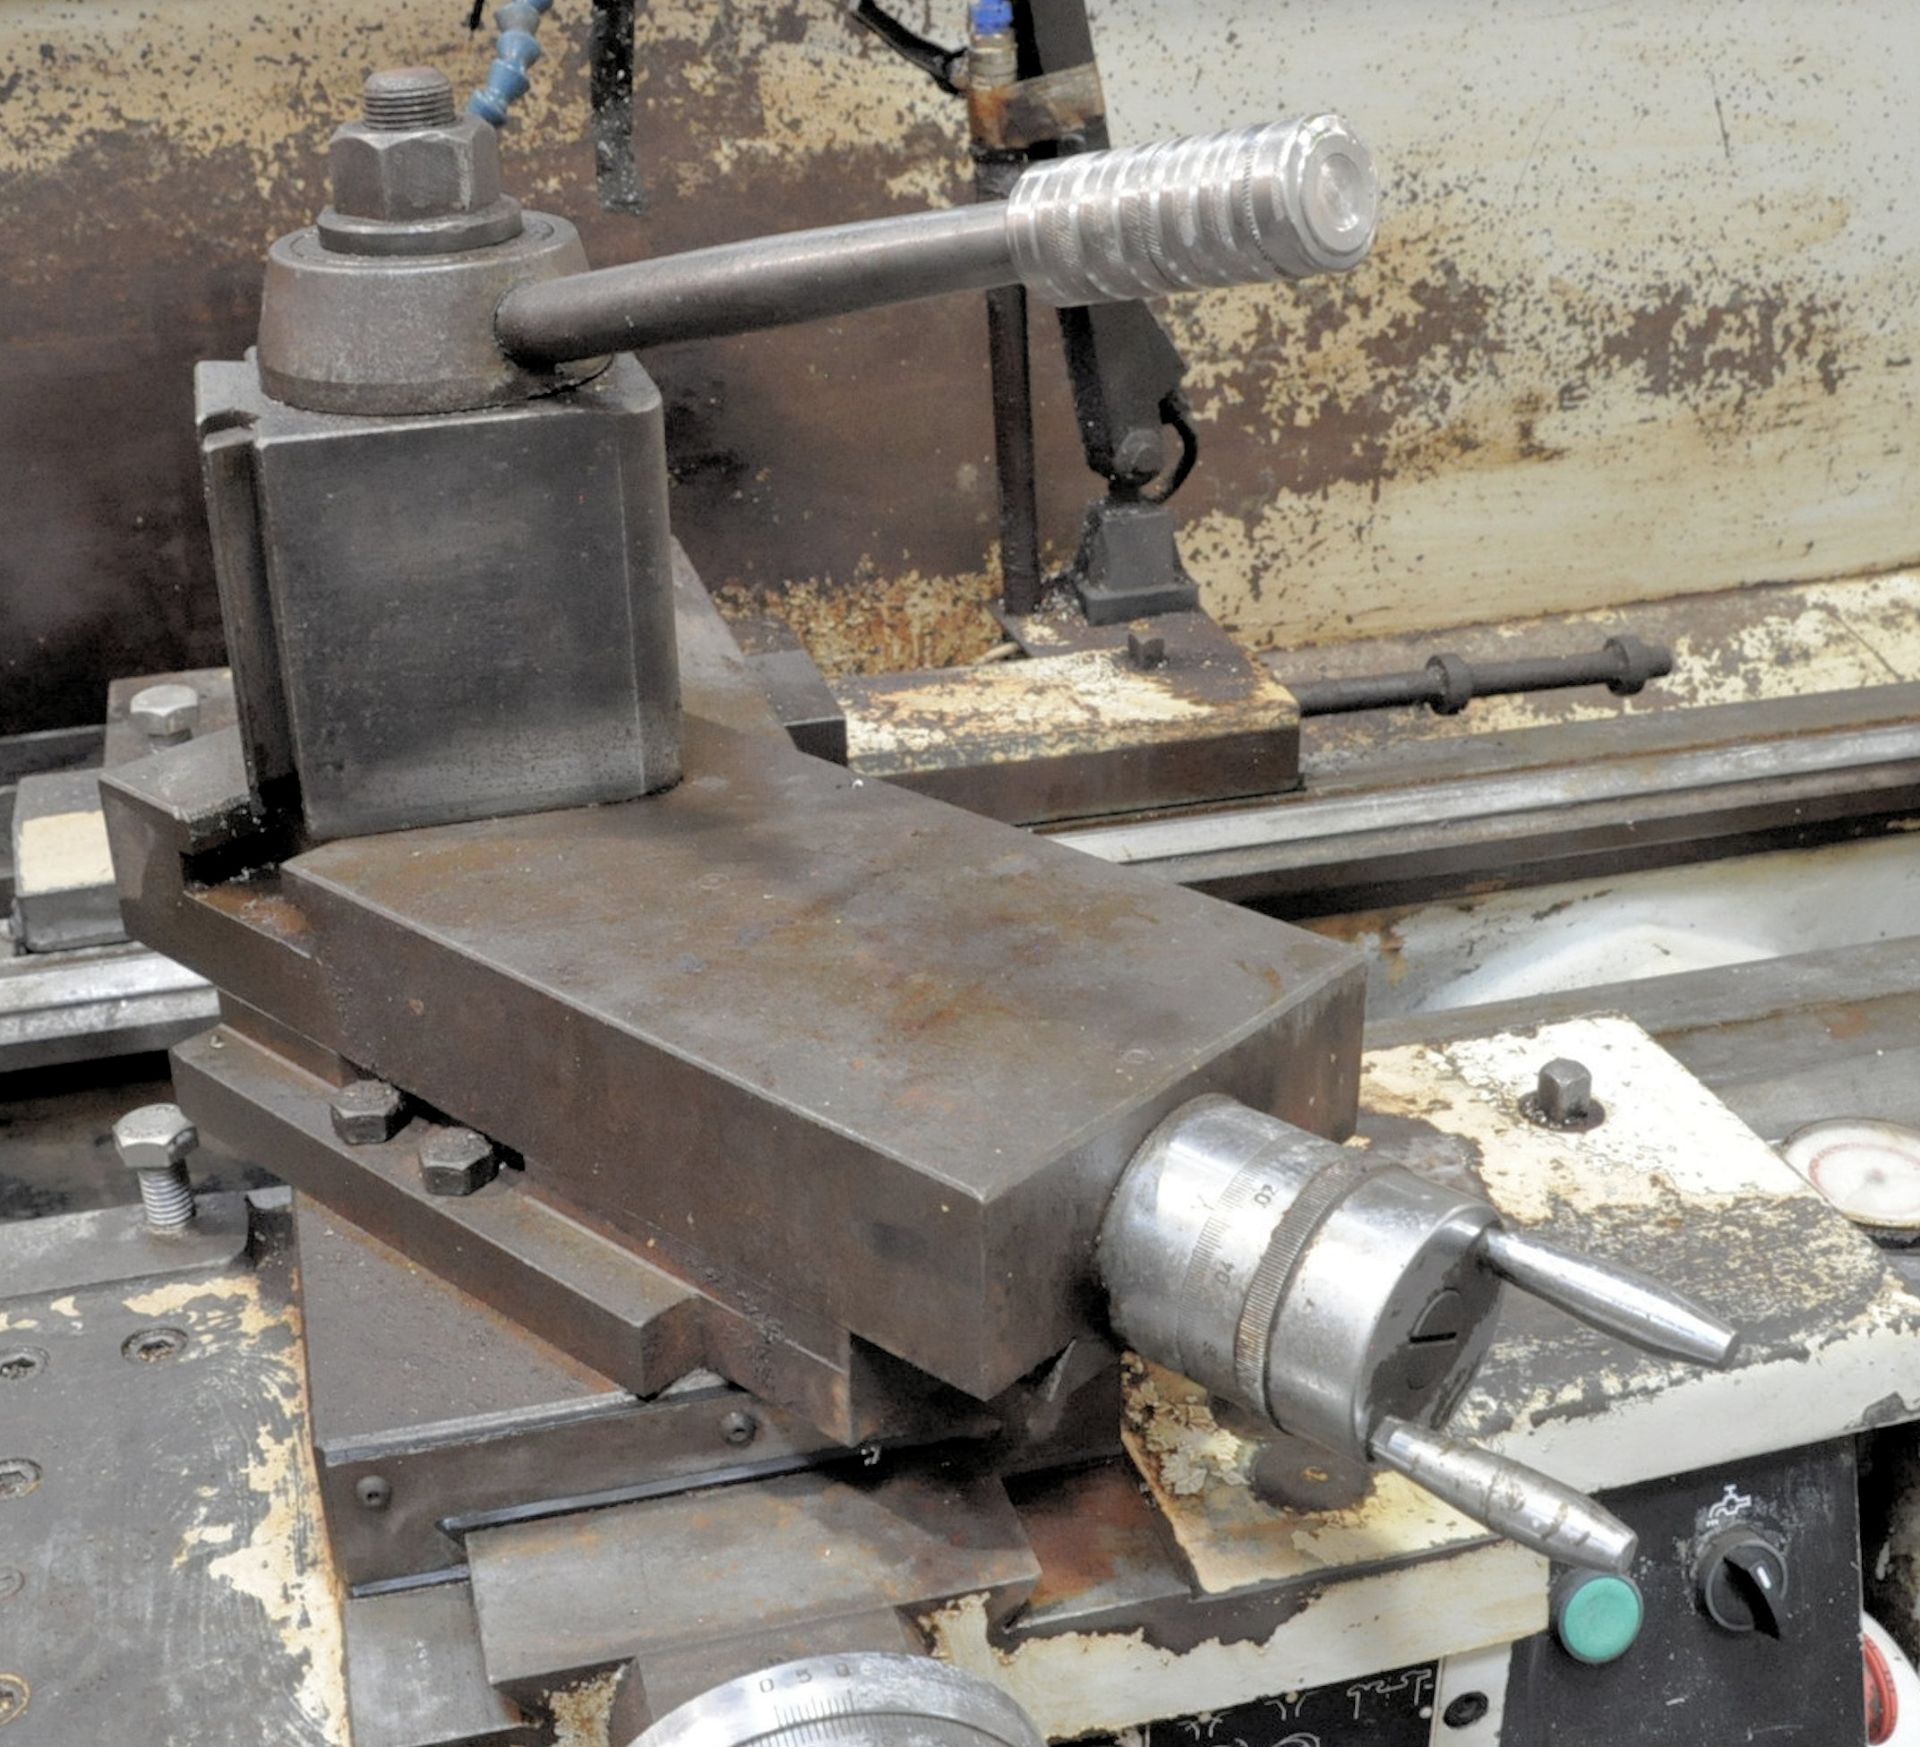 Summit Model 20X120 B, 20" x 120" Geared Head Engine Lathe,12" 4-Jaw Chuck, 4" Hole Through Spindle - Image 5 of 8